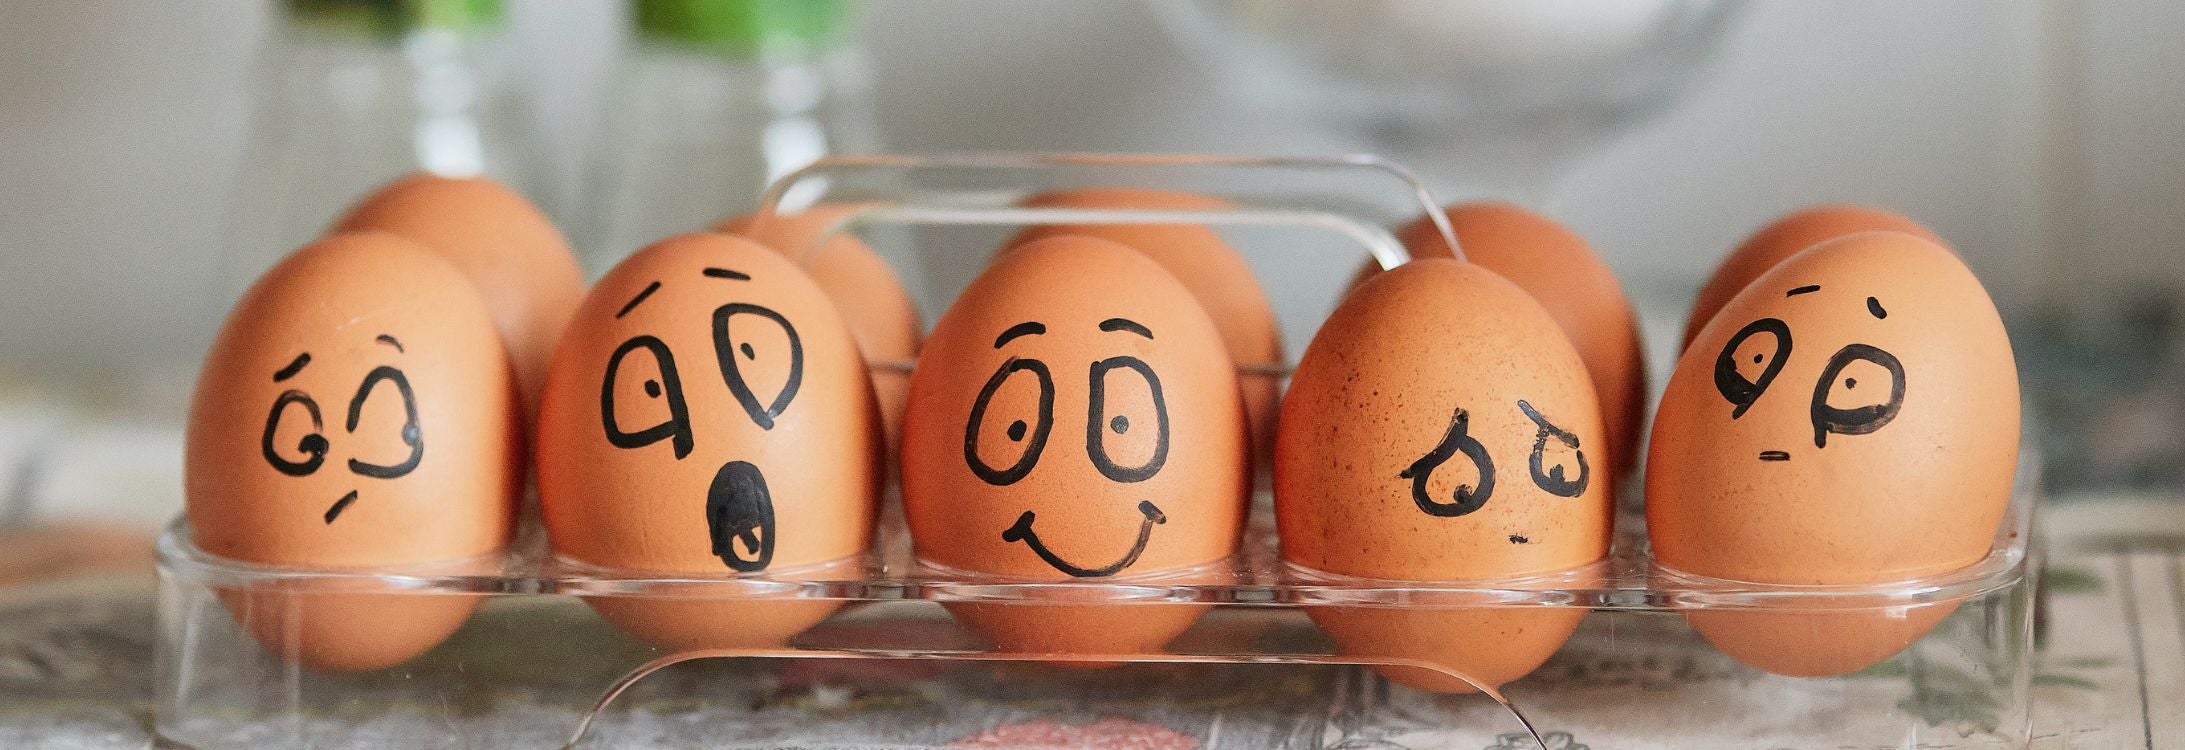 Eggs with faces drawn on - Impostor Syndrome blog cover